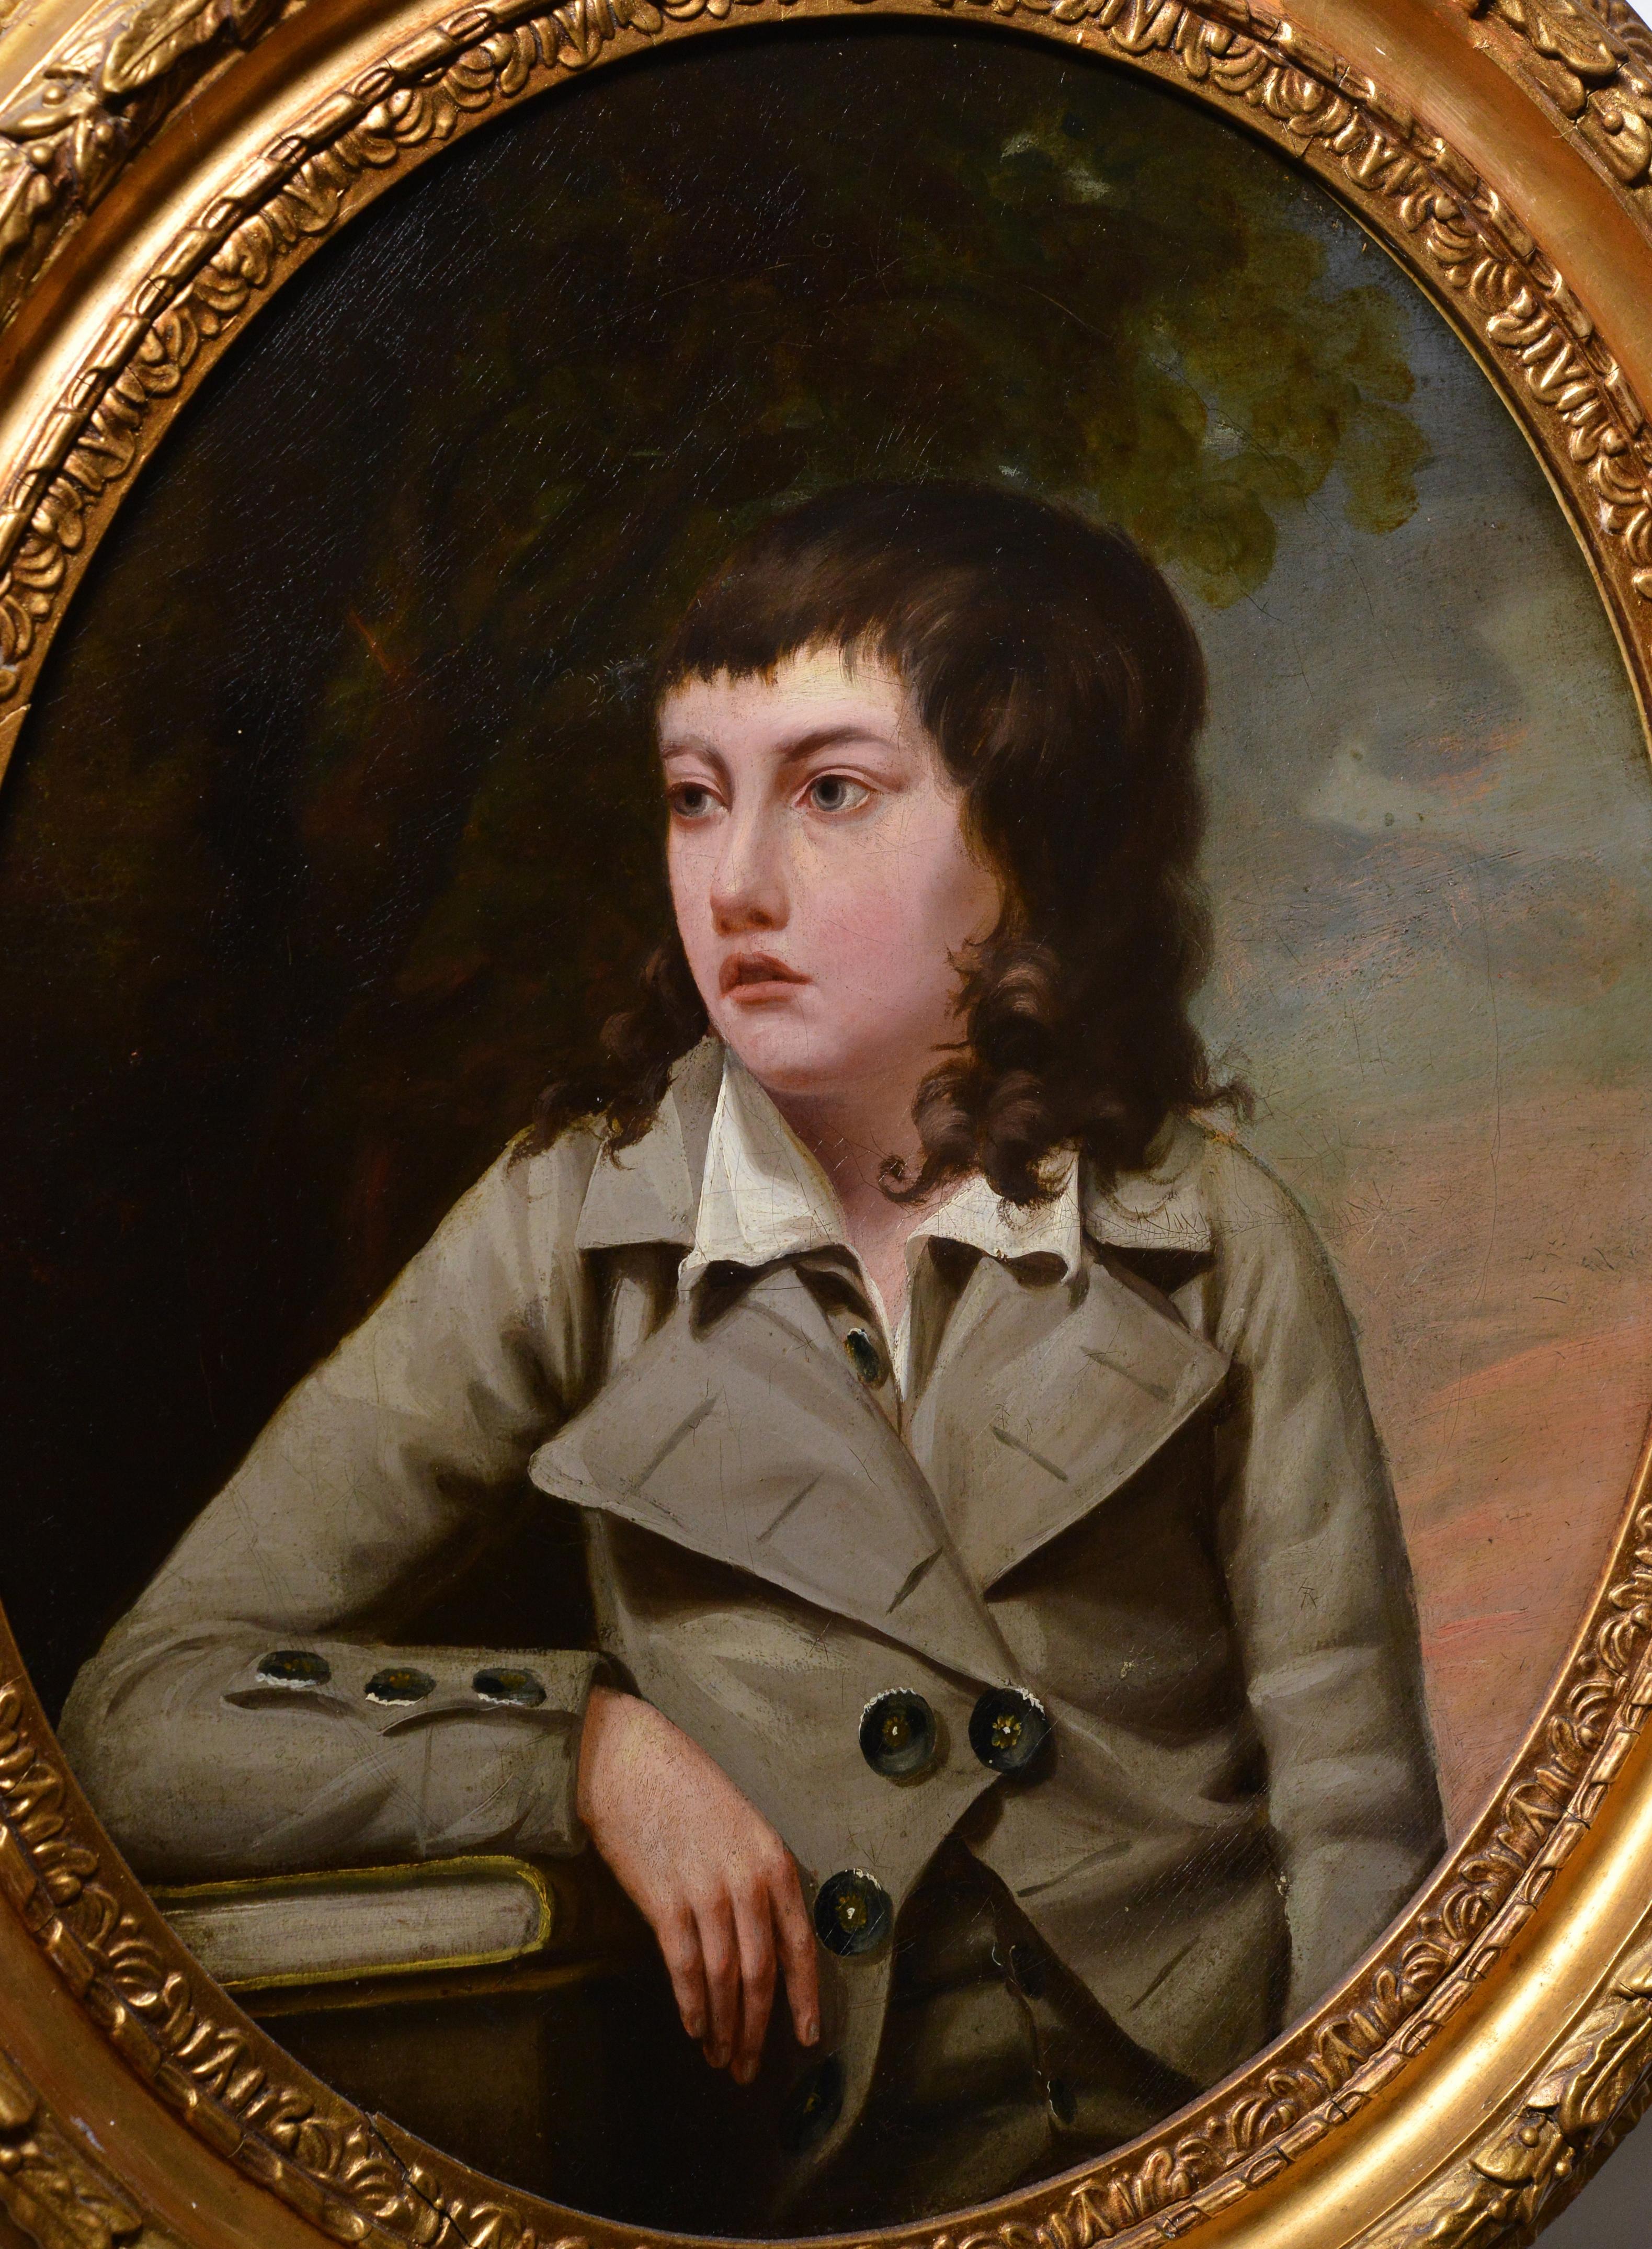 Portrait of Teenager Student 18th Century Oil Painting by British Master - Brown Portrait Painting by Attributed to John Opie R.A